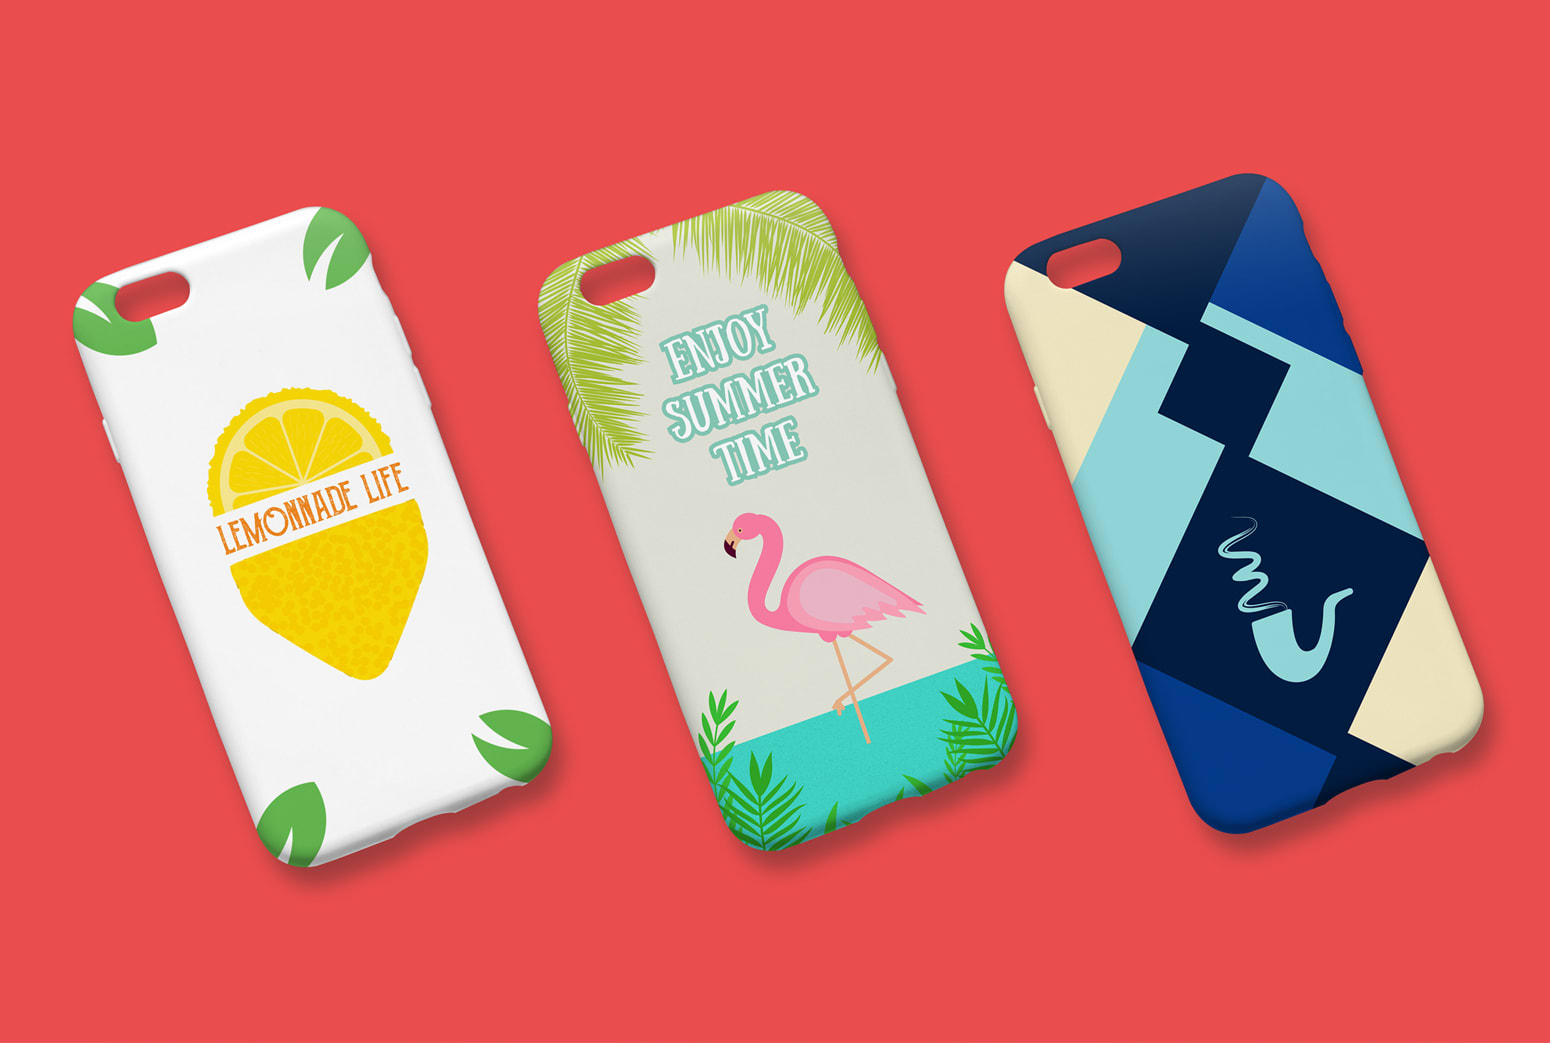 Design phone case for all print on demand business by Akib07 | Fiverr